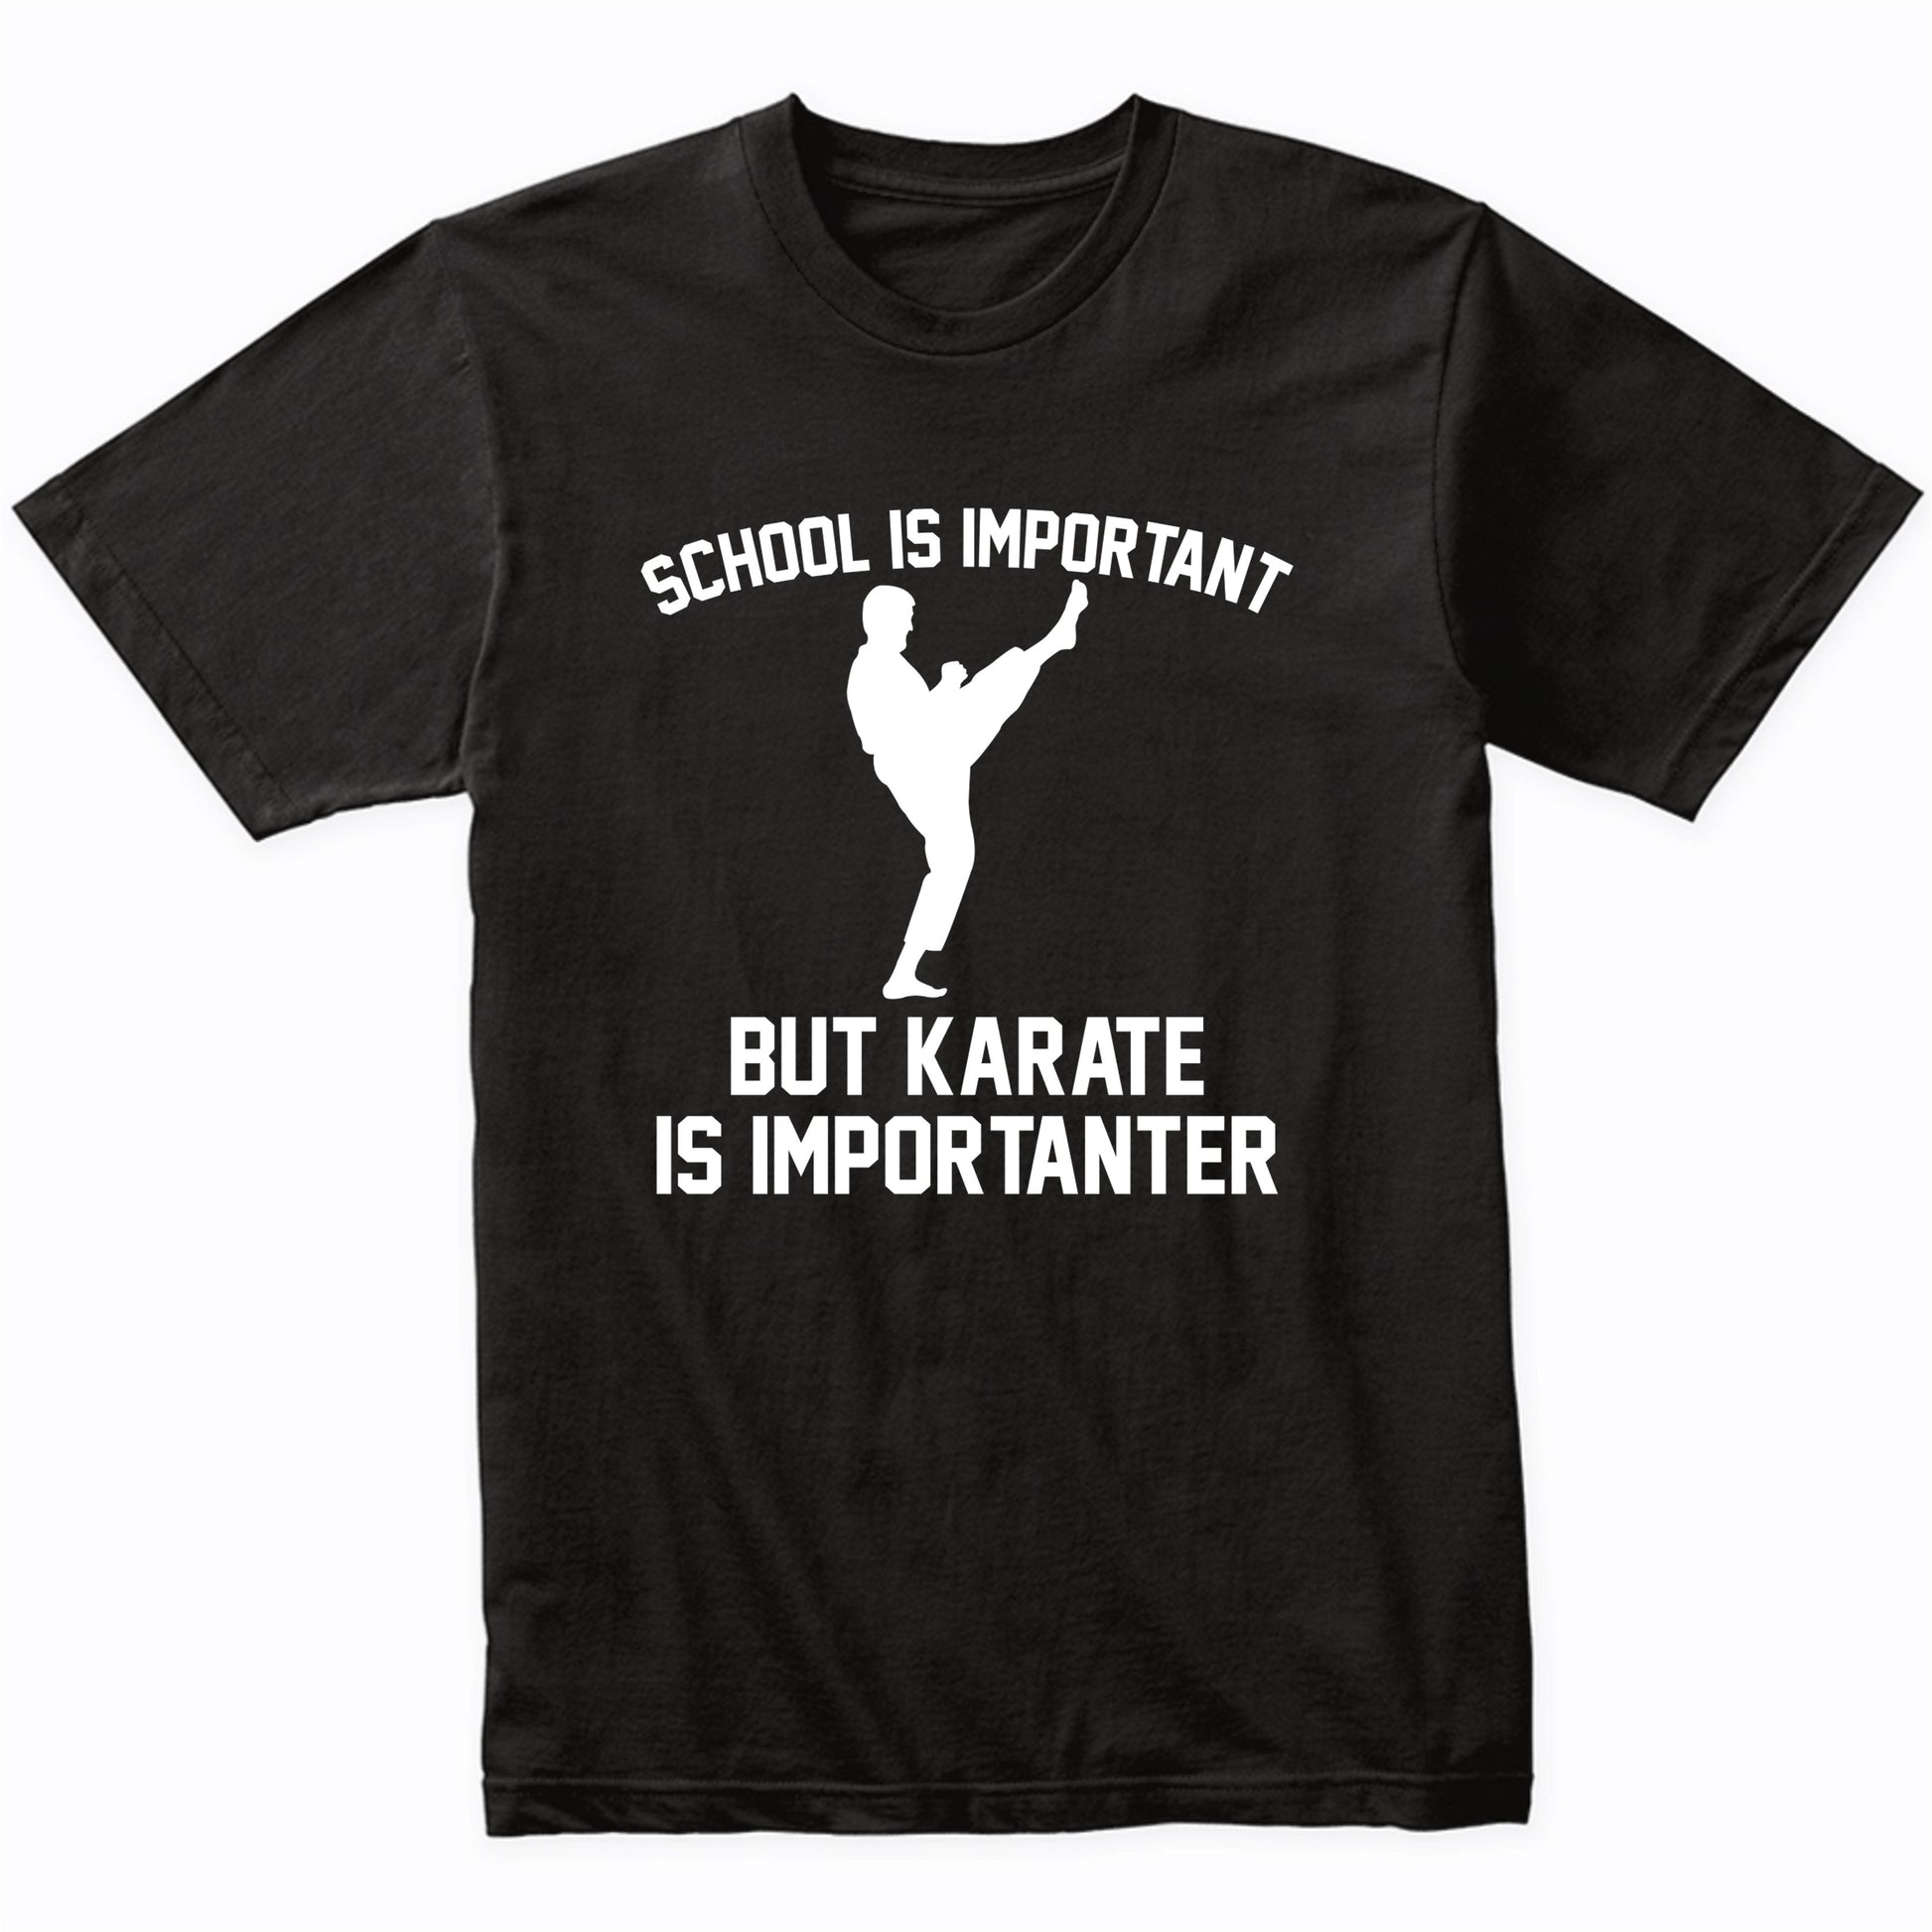 School Is Important But Karate Is Importanter Funny Shirt